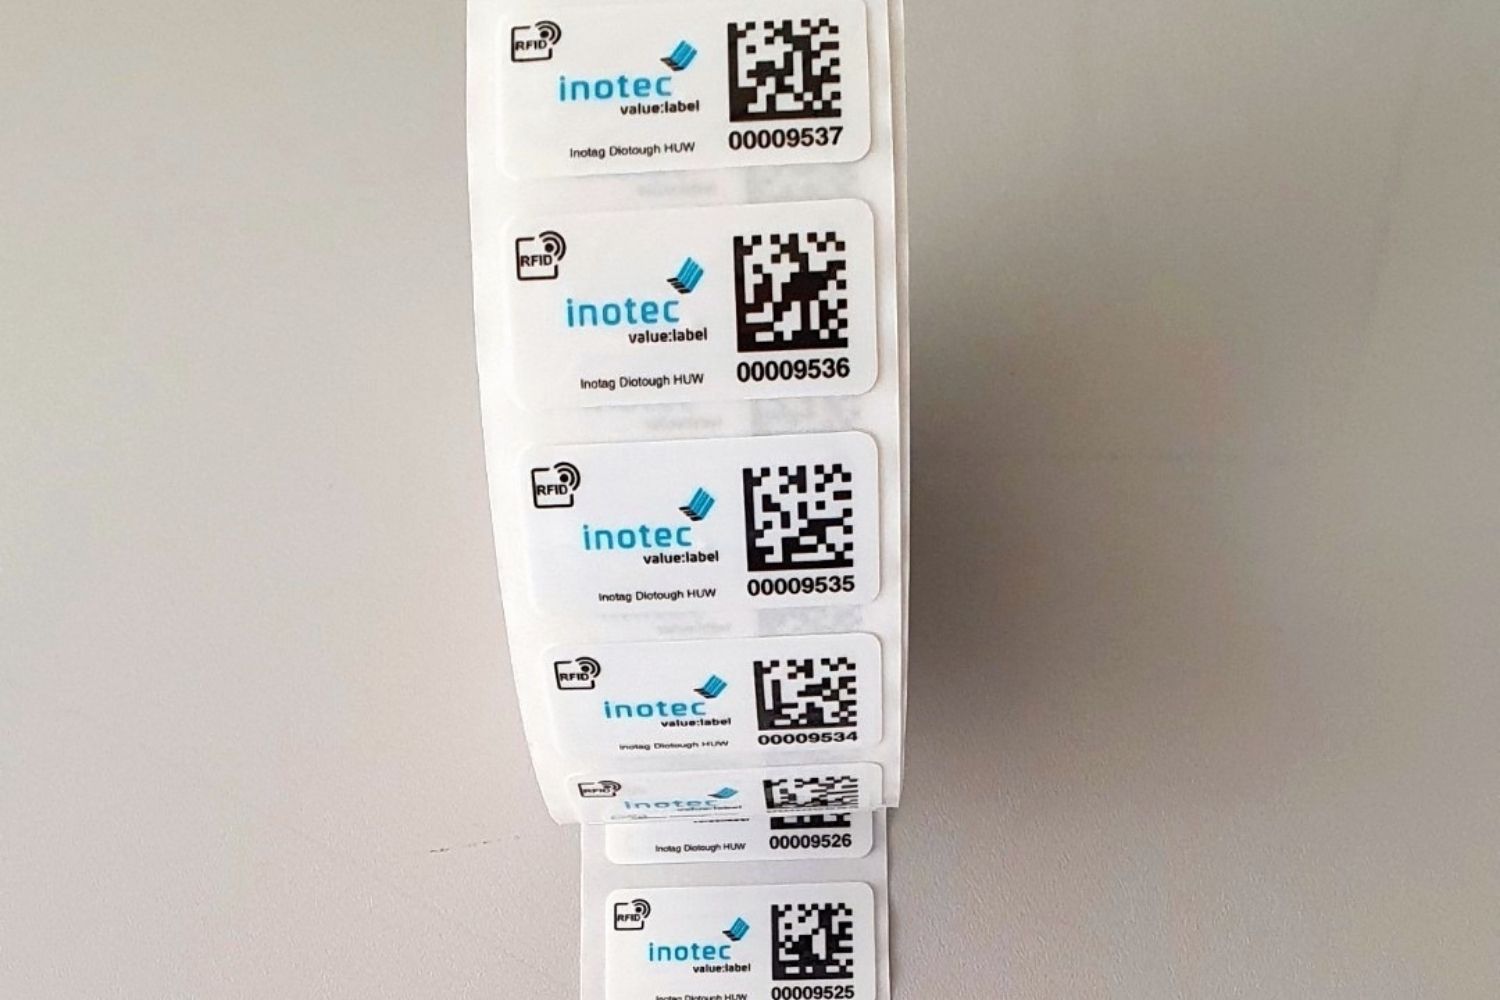 inotec Barcode RFID Solutions Diotough HUW